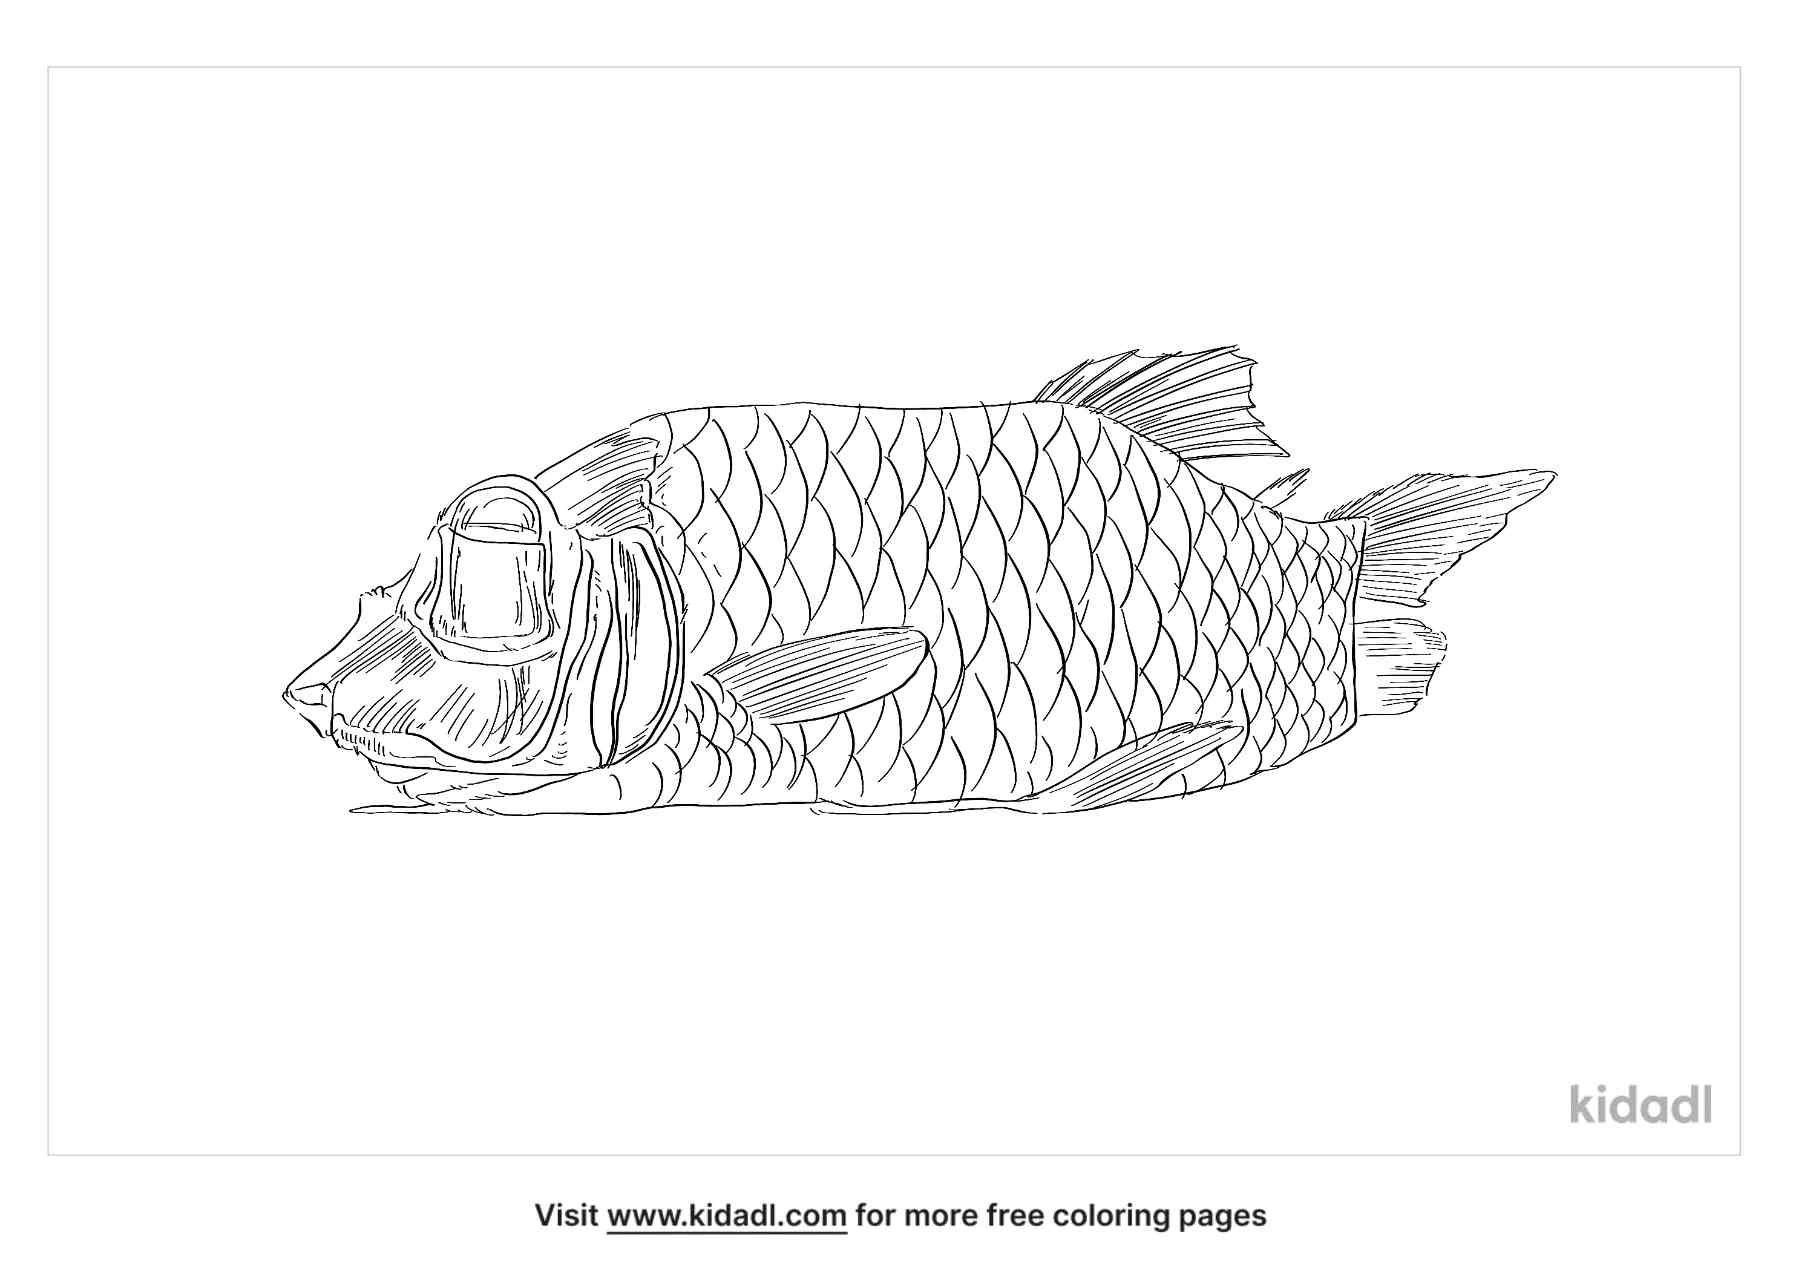 coloring page that contain barreleye fish